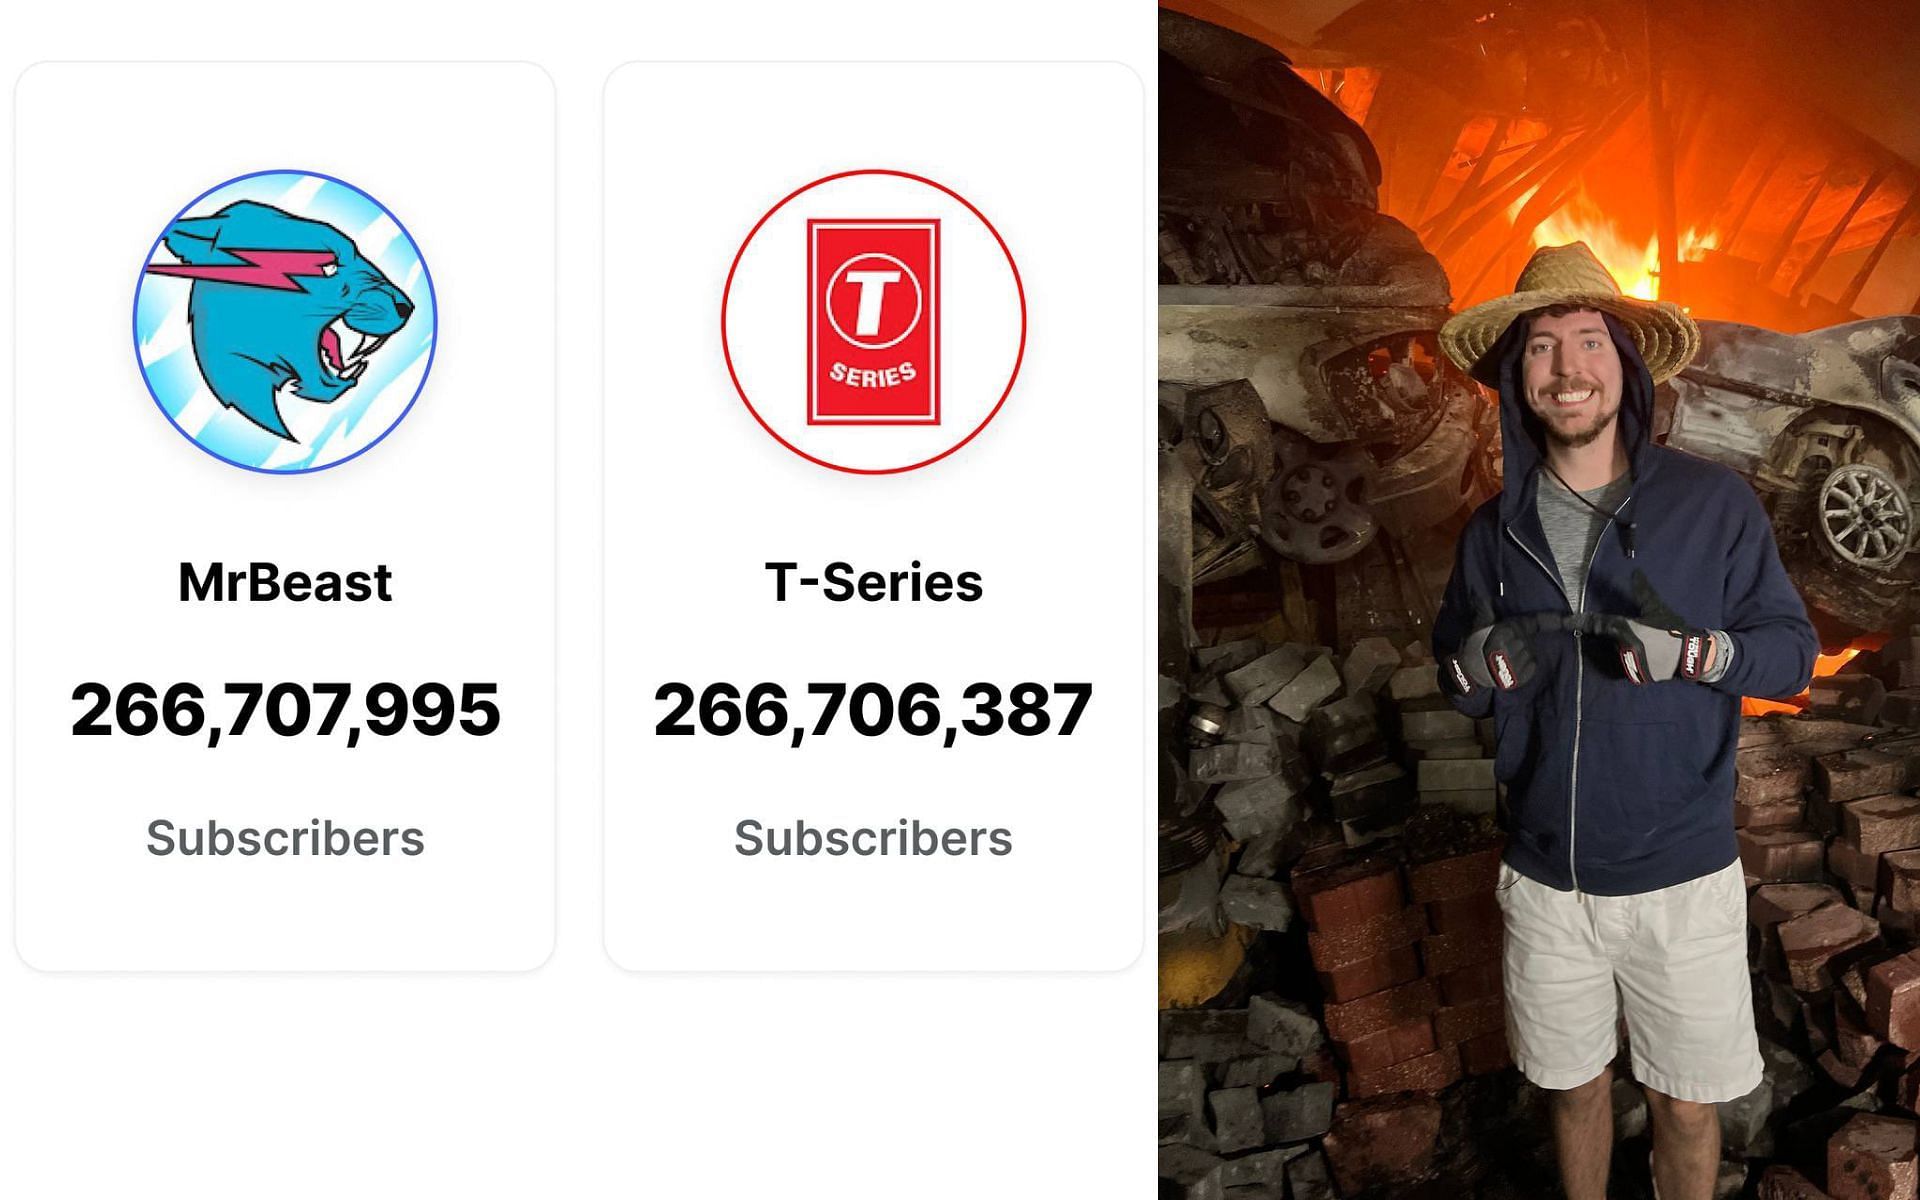 MrBeast officially overtakes T-Series to become the most subscribed YouTuber,